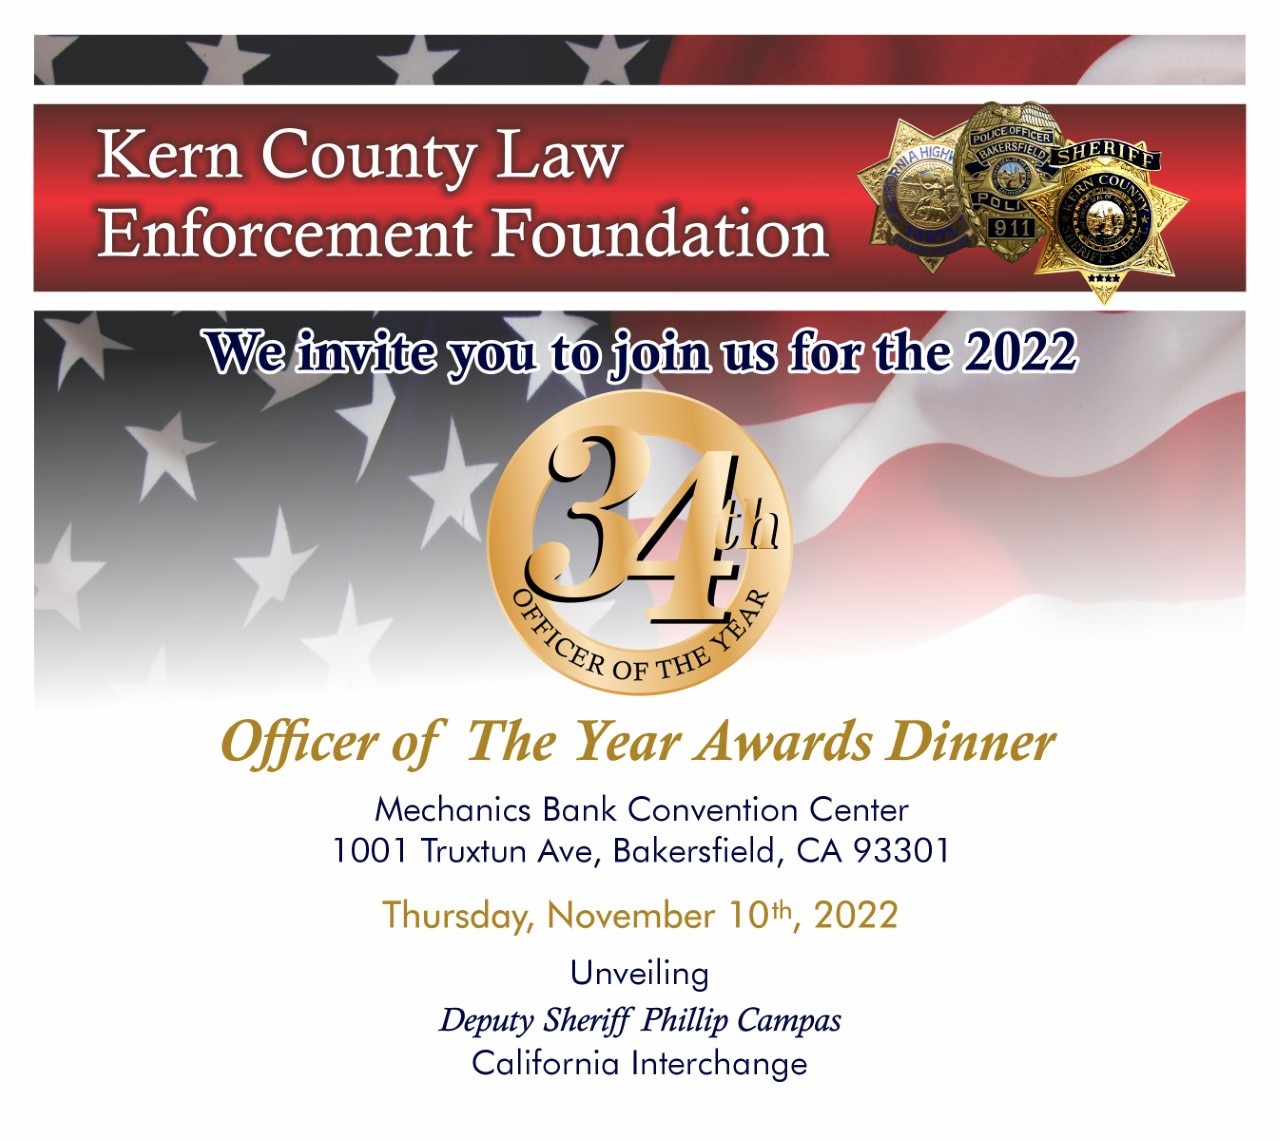 KCLEF 34th Annual Officer of the Year Awards Dinner